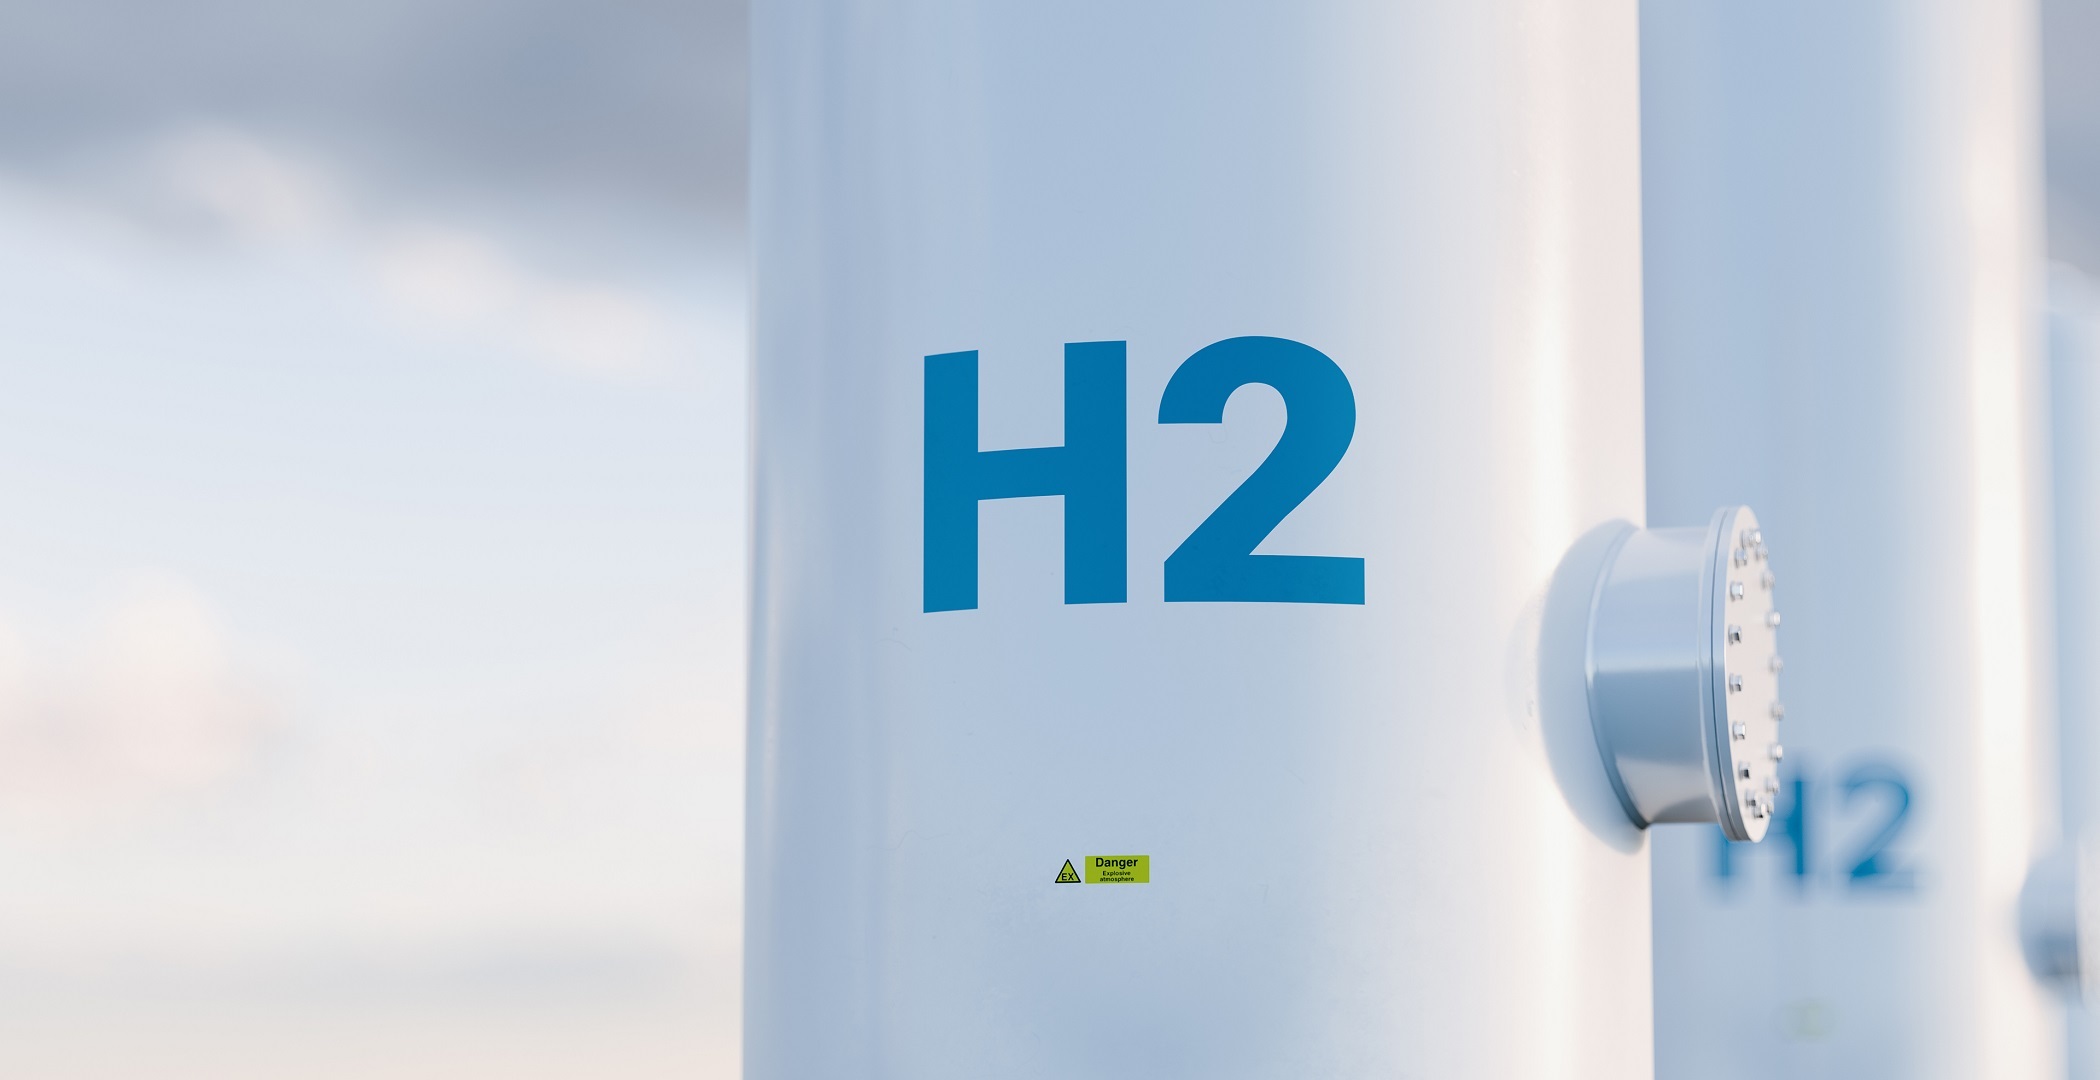 Industrial, Energy Giants Launch Fund to Accelerate Clean Hydrogen Ecosystem